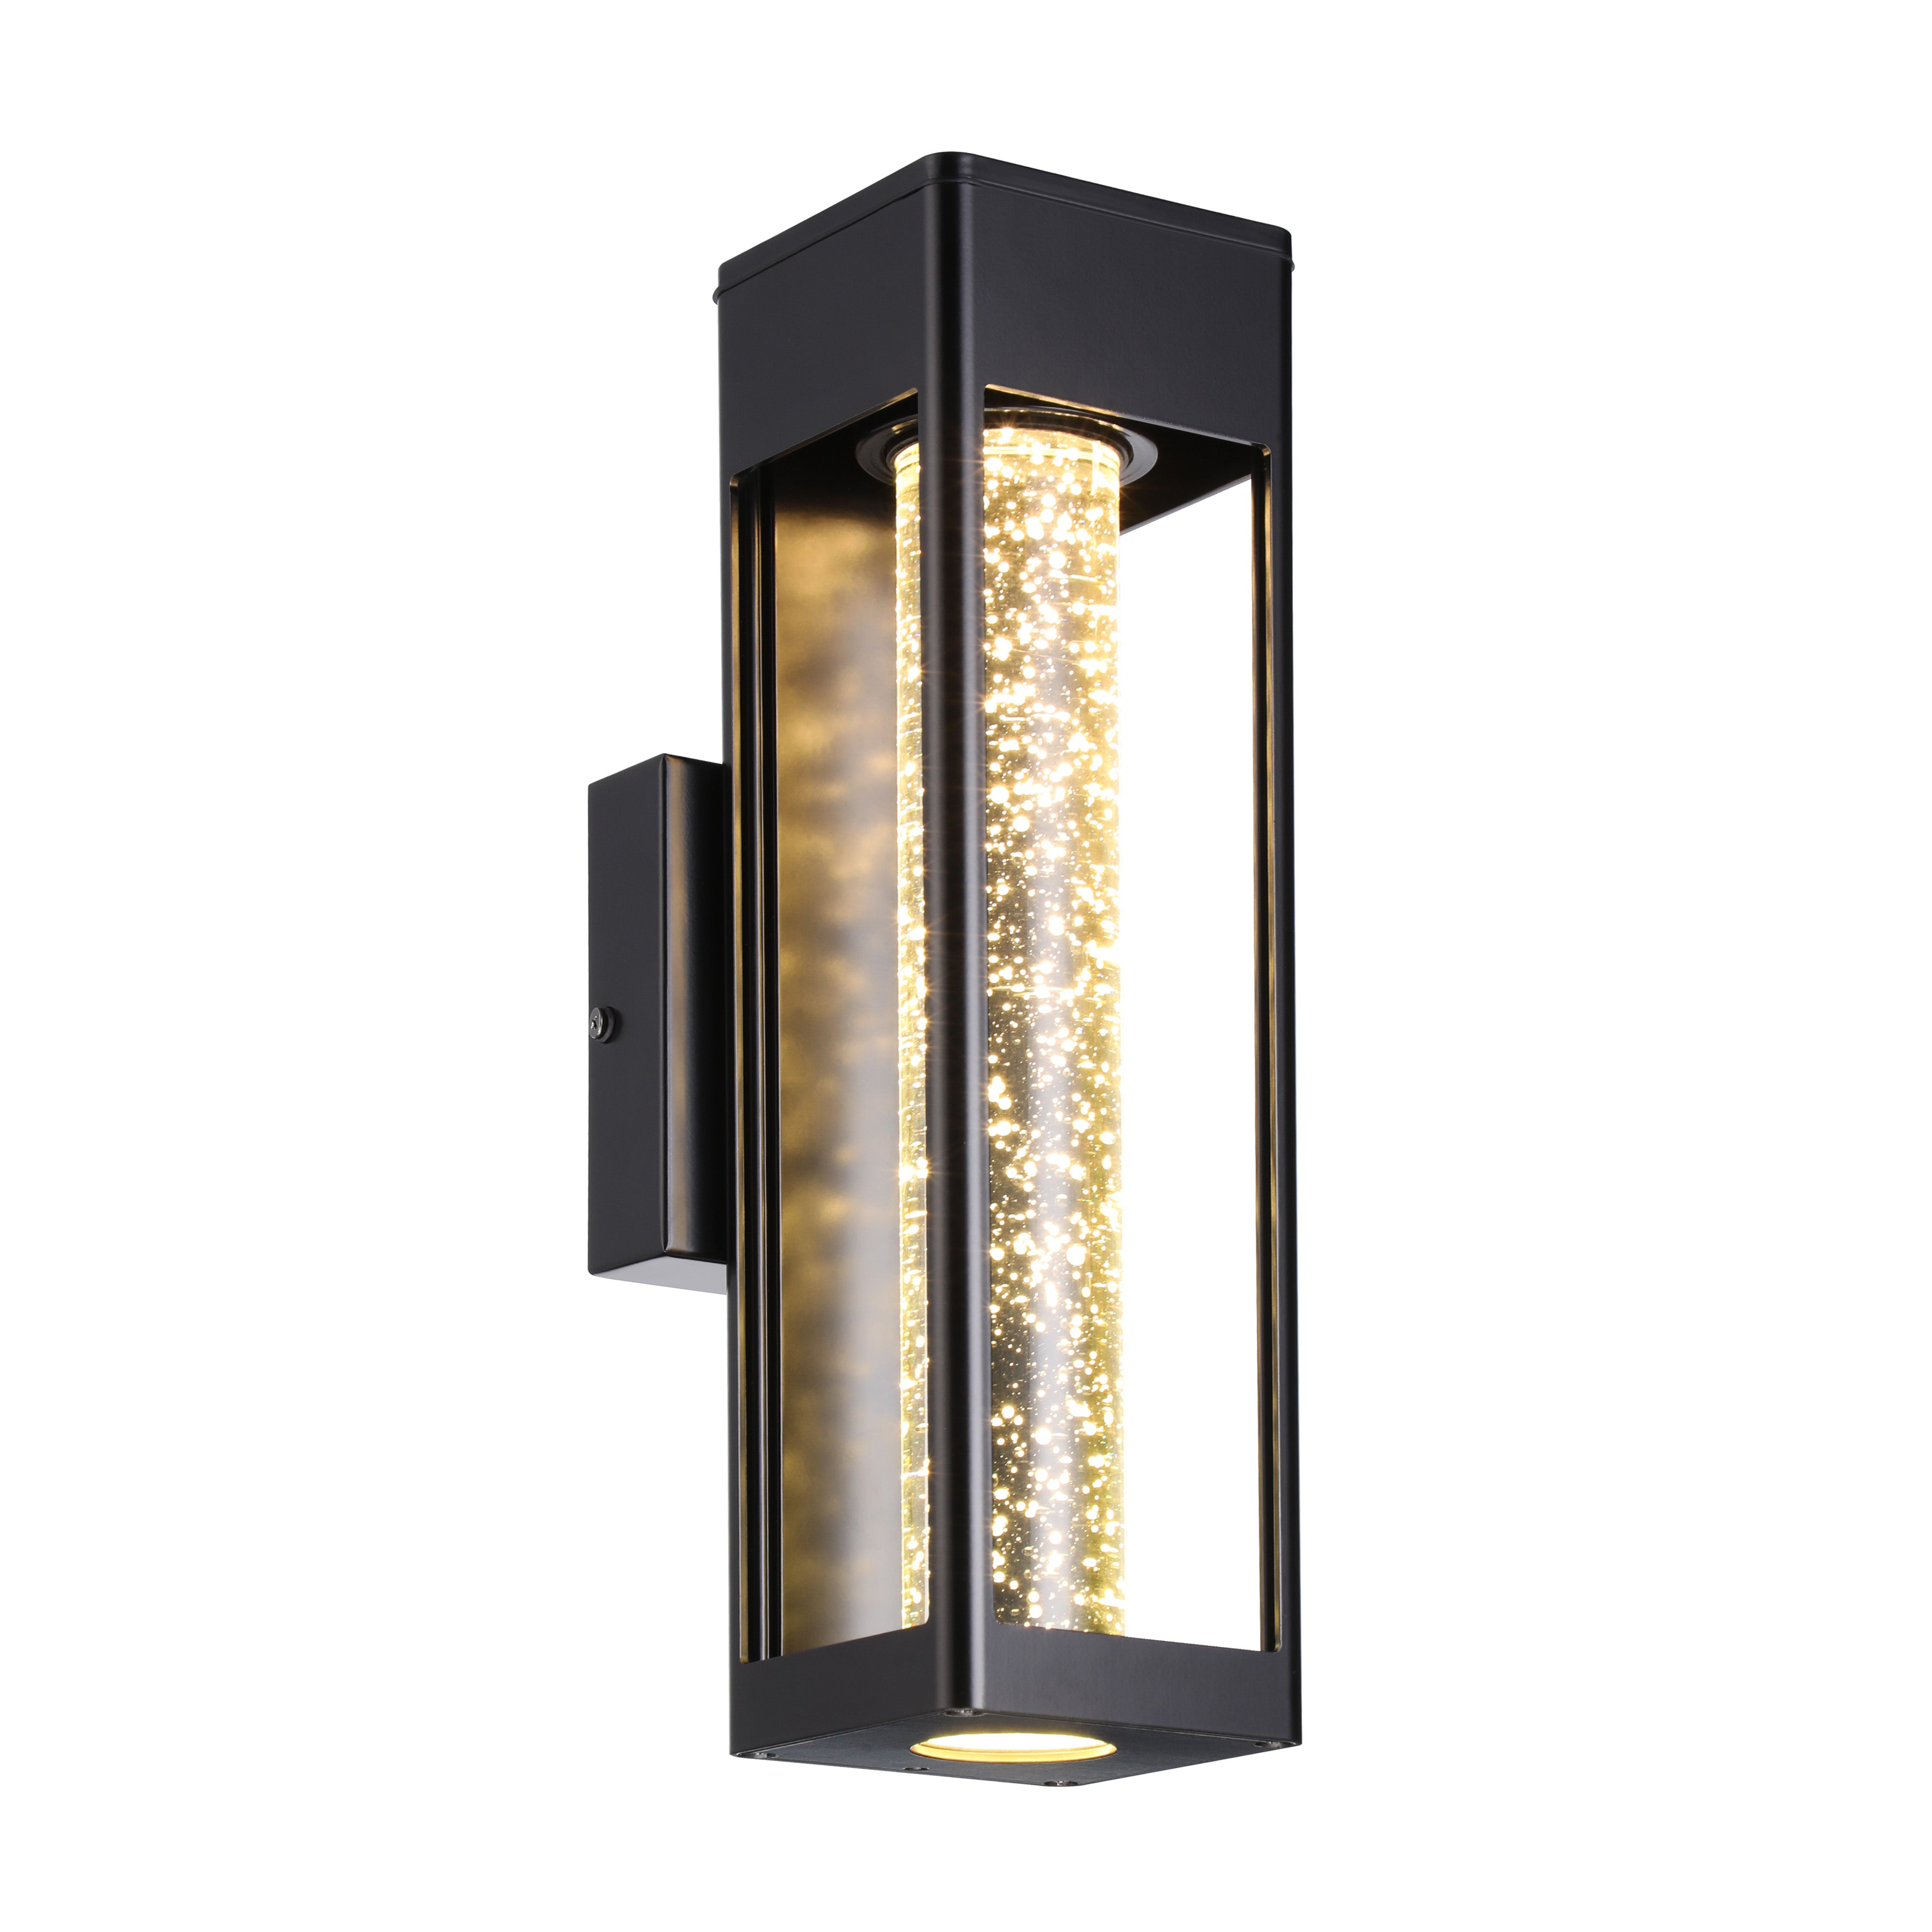 The Stella 12W Outdoor Wall Sconce